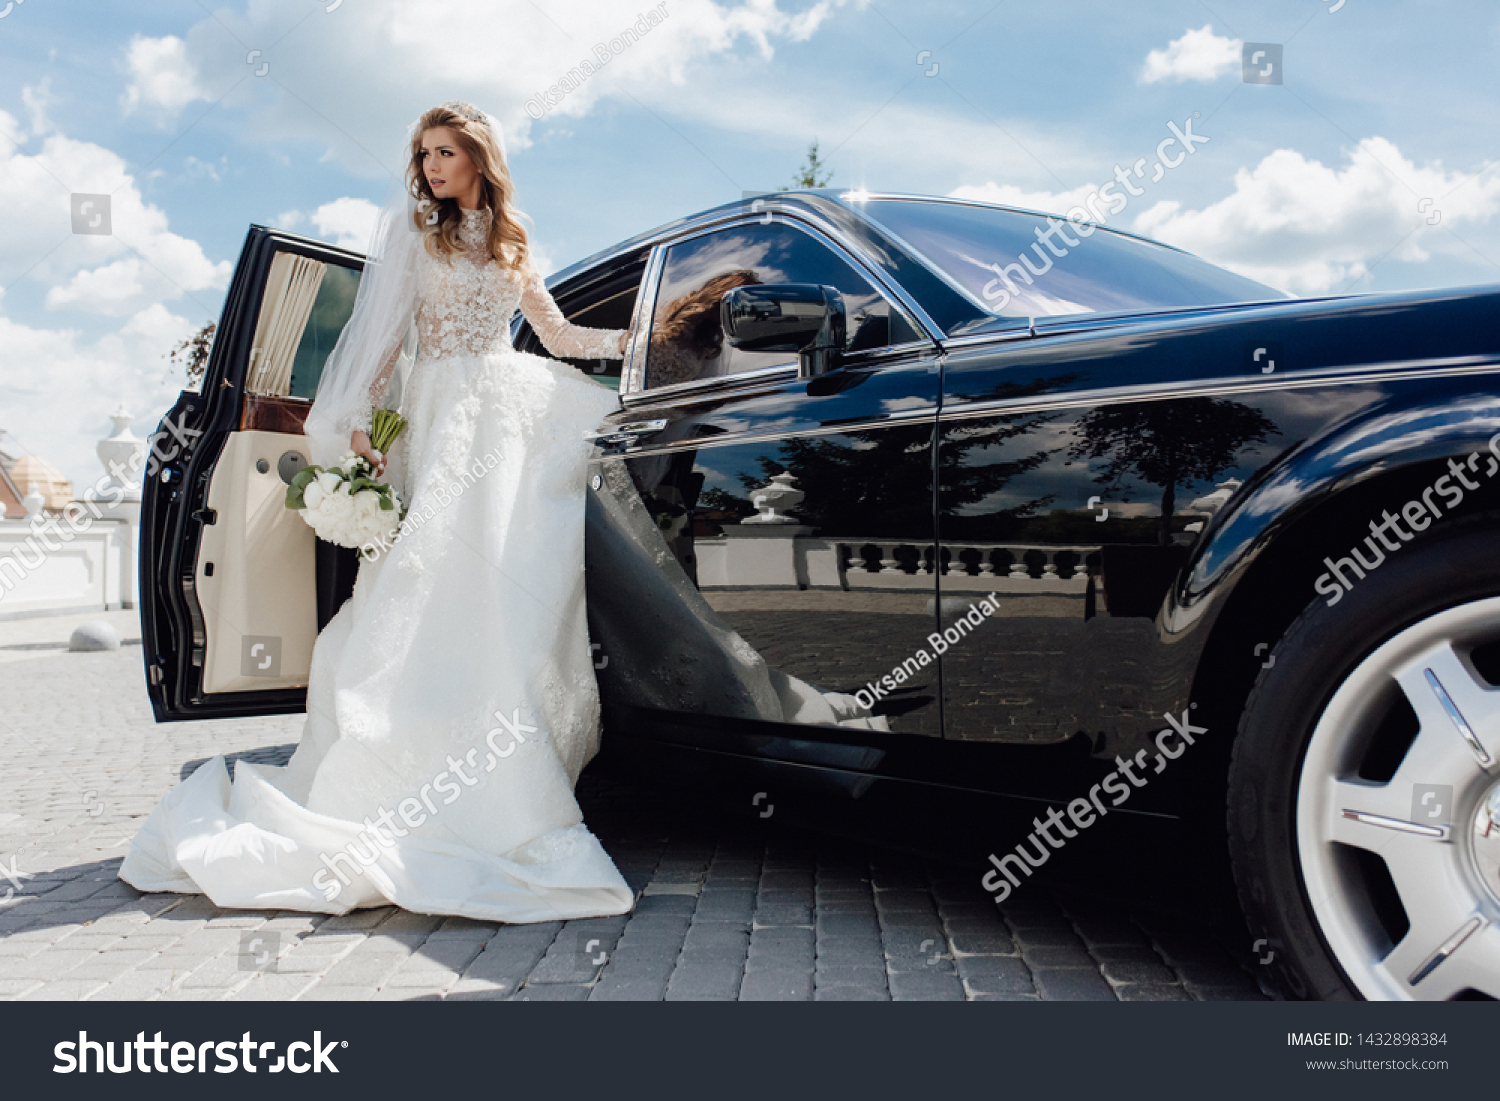 Stylish Bride with Flower Bouquet near Limousine. Pretty Young Woman Dressed White Wedding Dress and Jewelry Diadem with Veil. Girl Holding Roses Bunch and Standing near Black Car. Outside Photo #1432898384